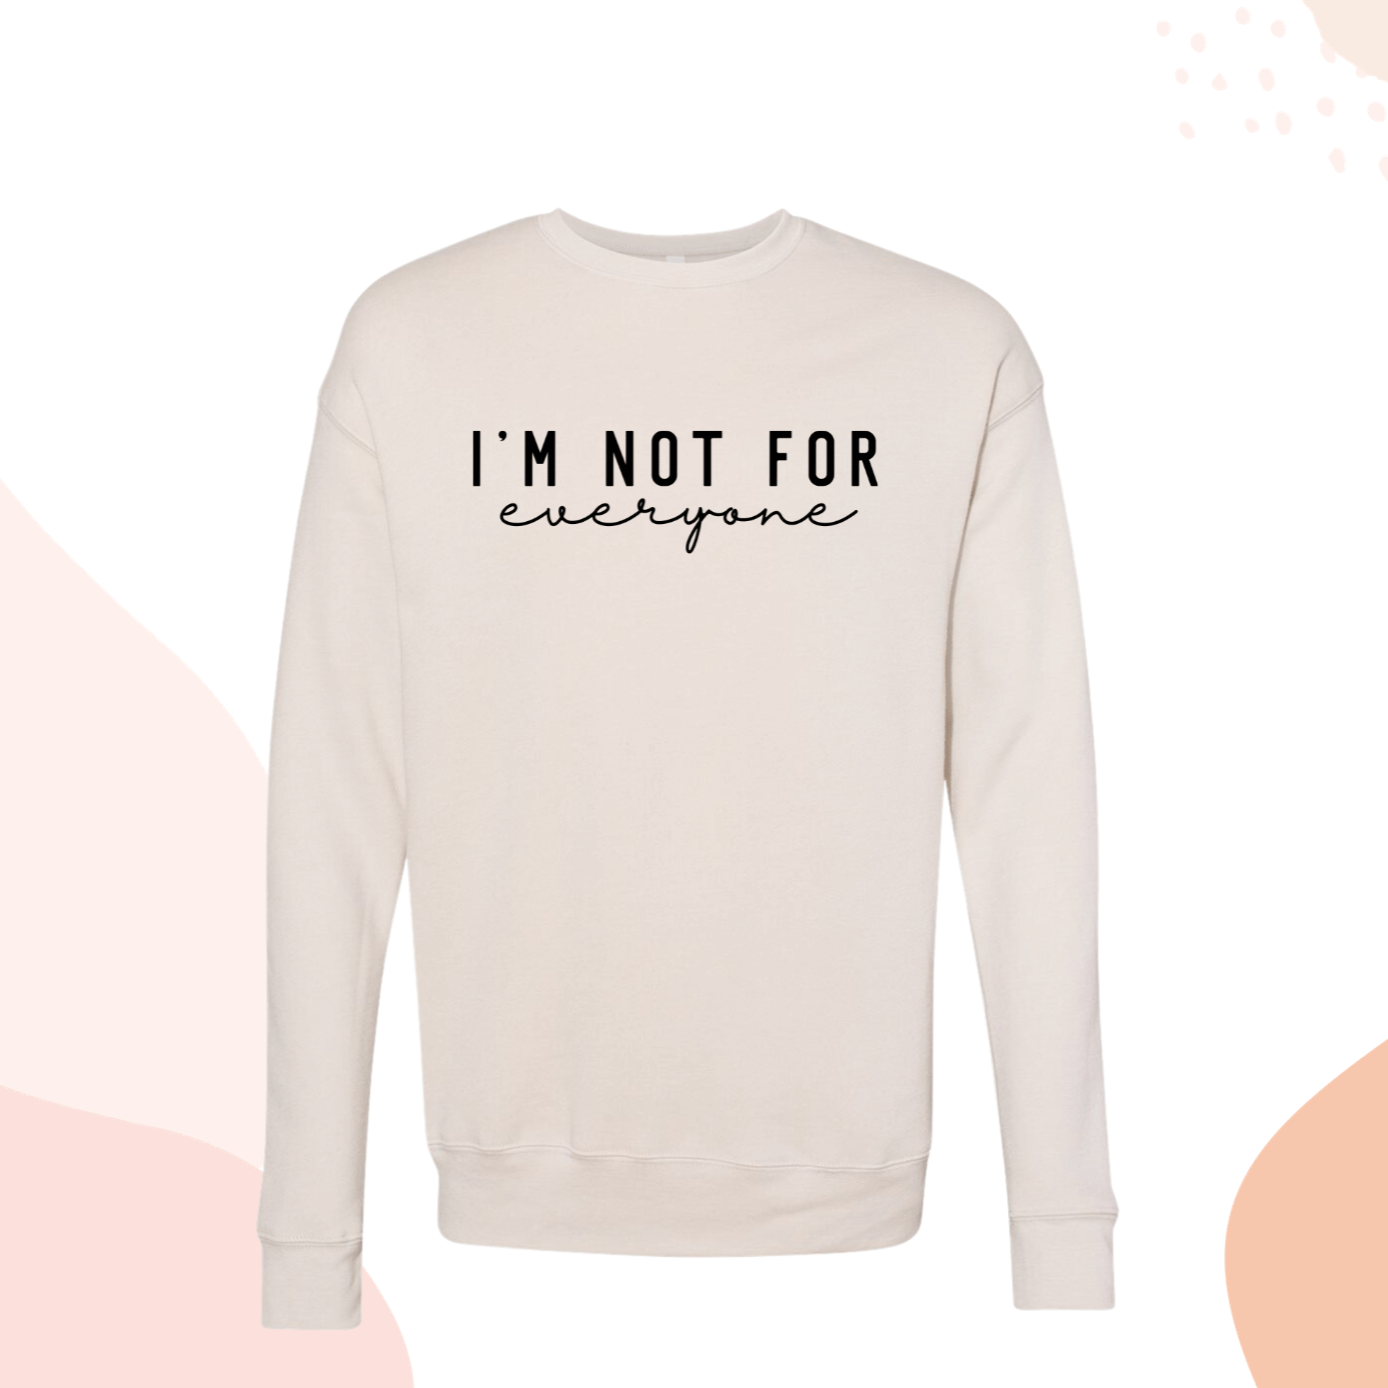 I’m Not for Everyone Funny Sweatshirt Royal Blue for Women Self Love Royal Blue Crewneck Protect Your Peace Sweater for Her Royal Blue